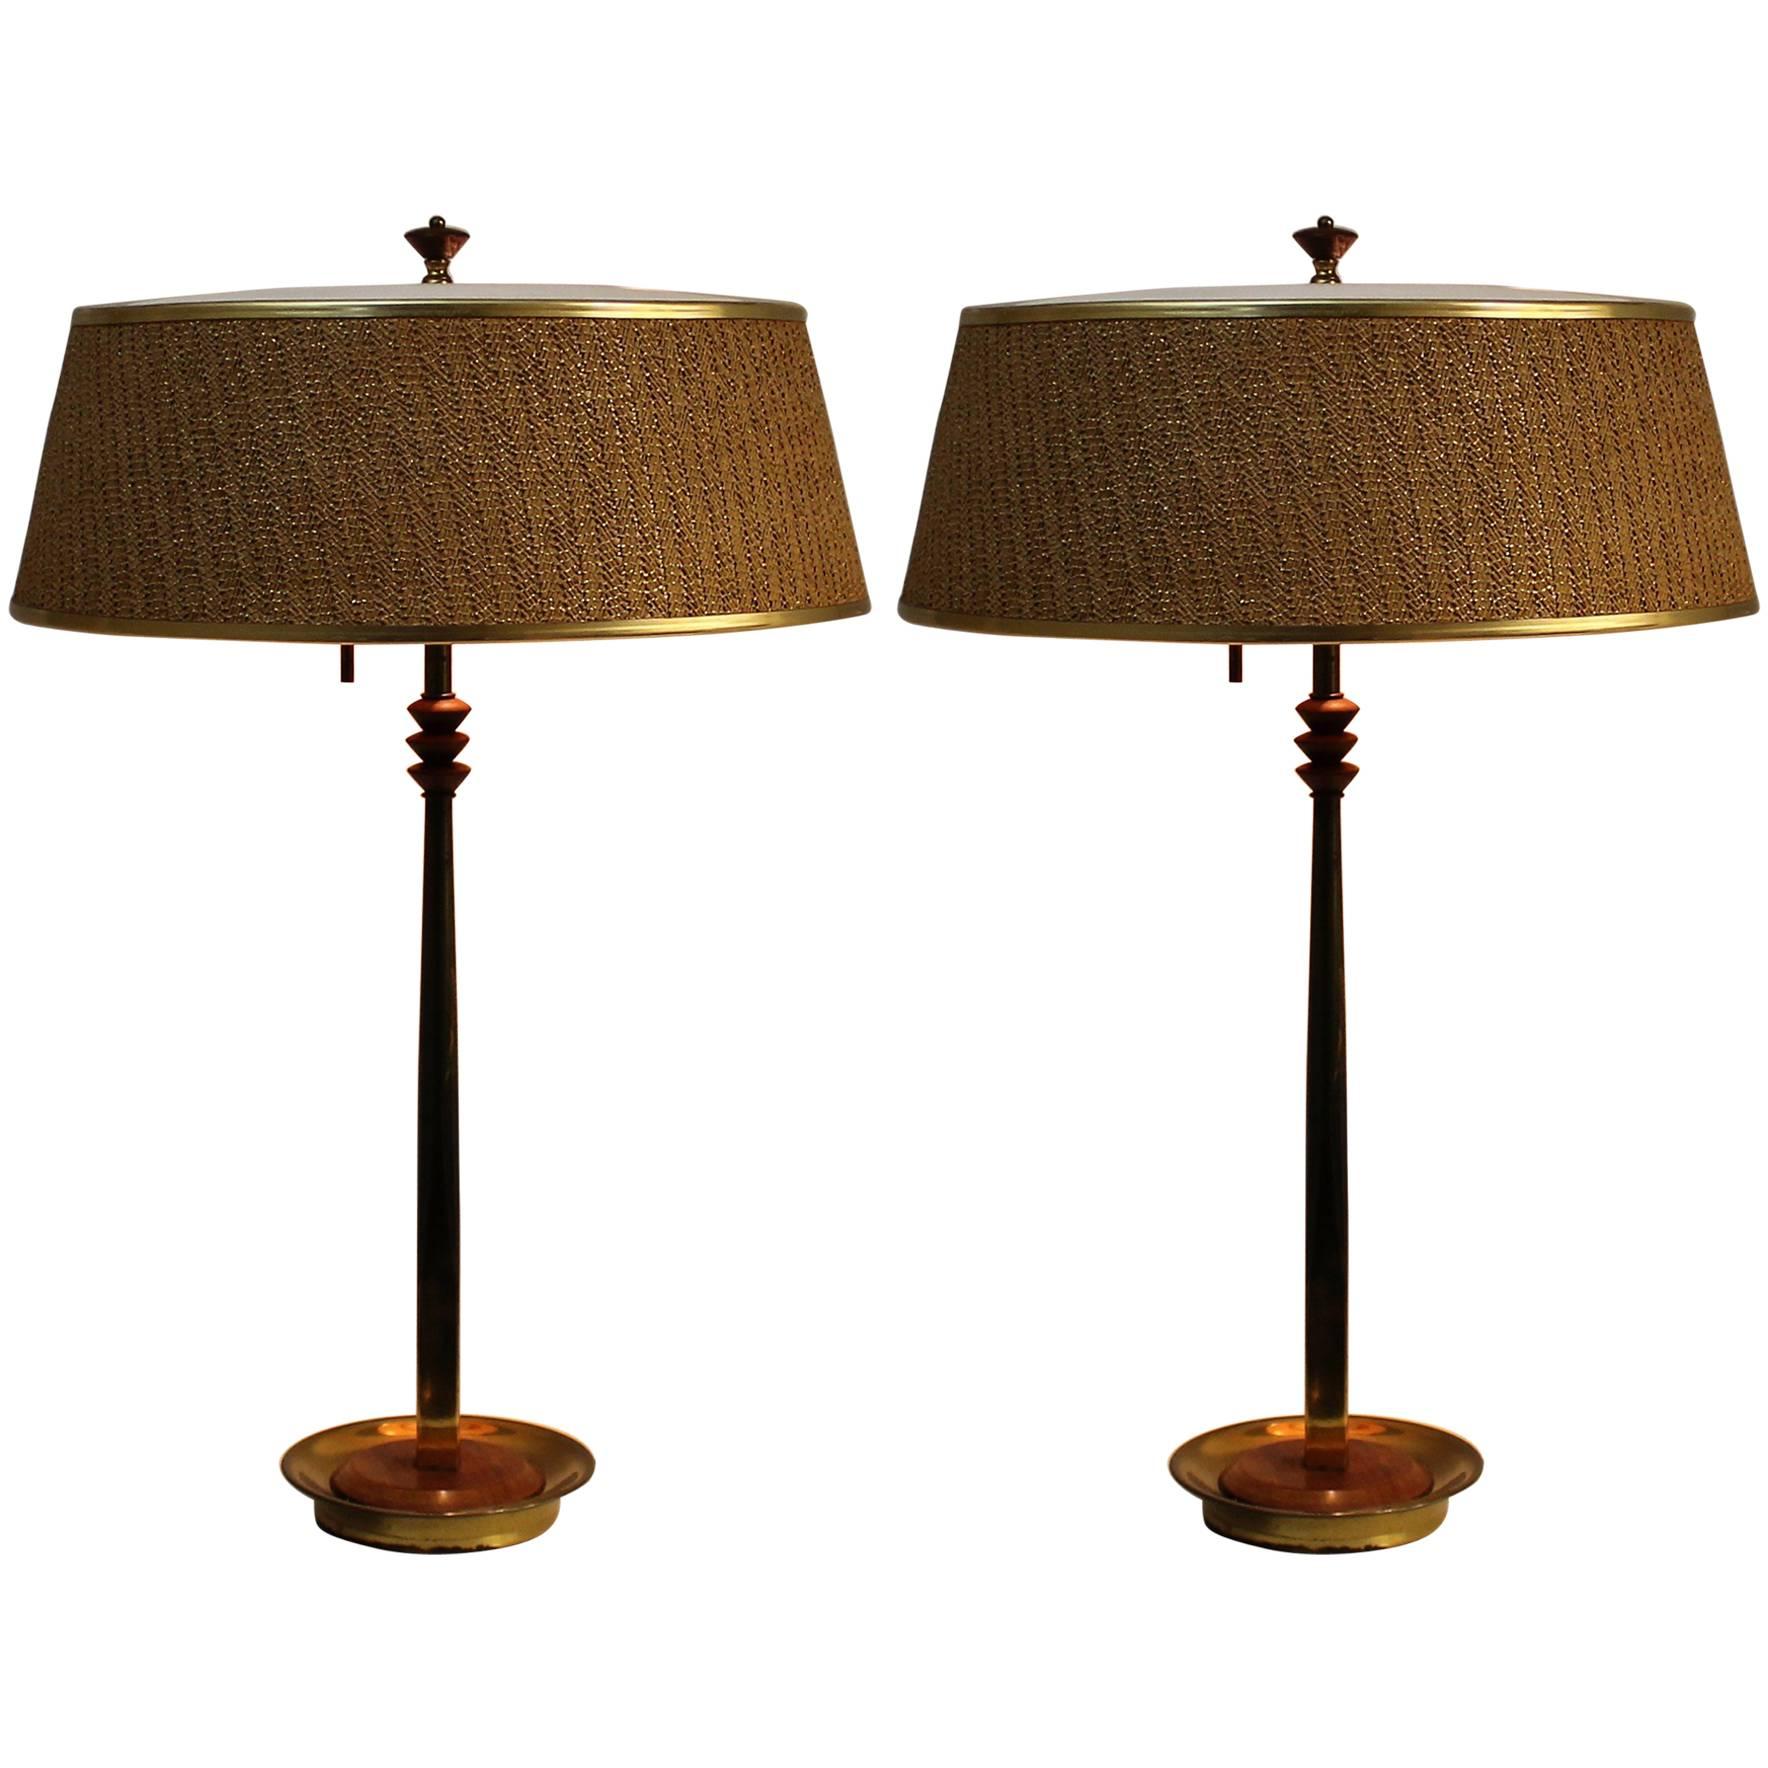 Pair of Midcentury Lamps Attributed to Gerald Thurston